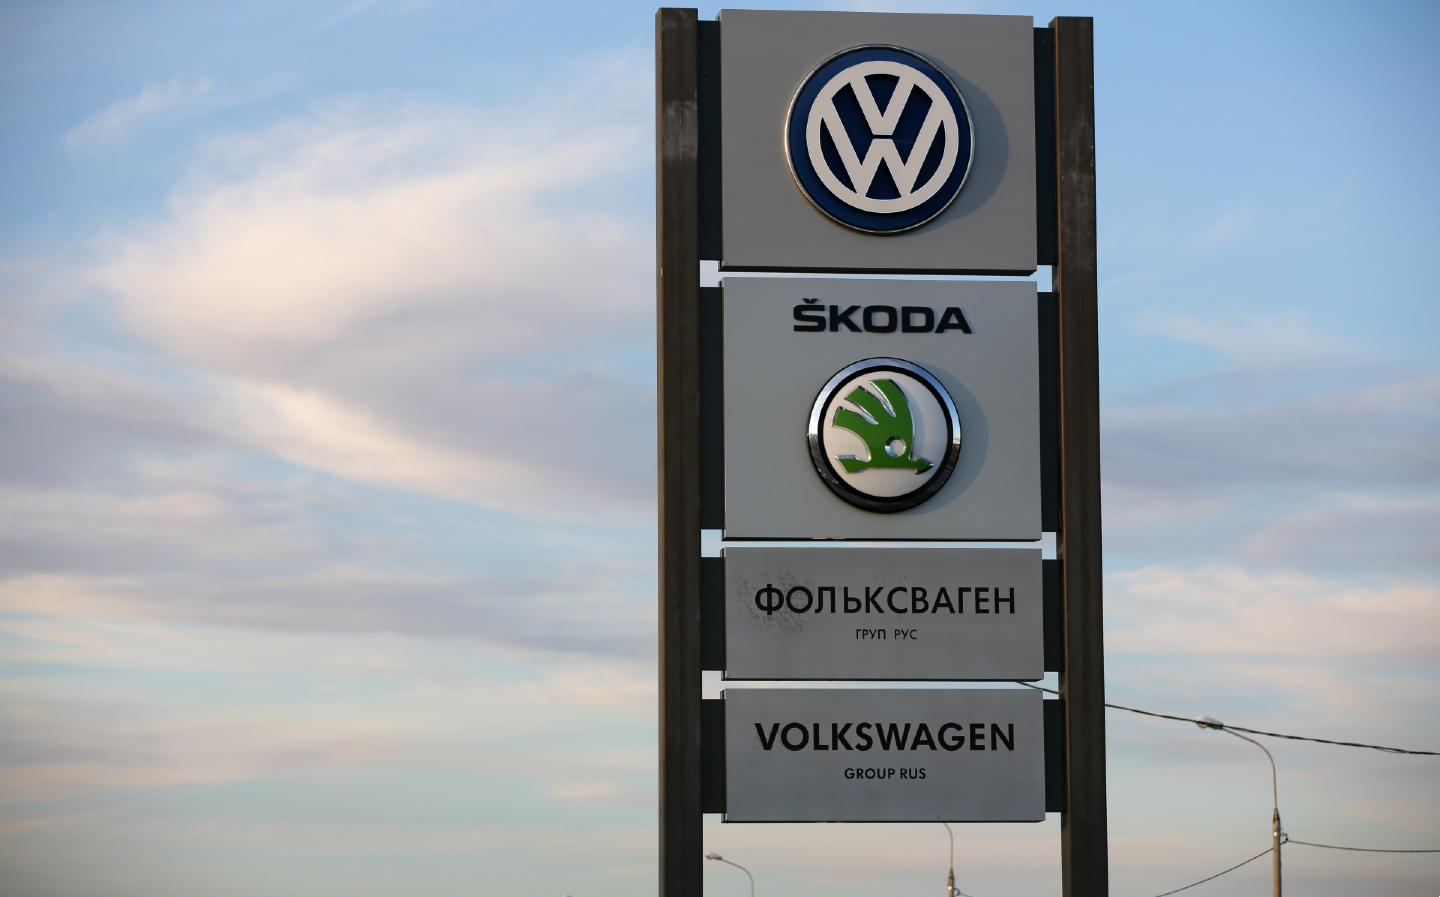 Skoda close to deal on sale of Russian assets in wake of Ukraine invasion